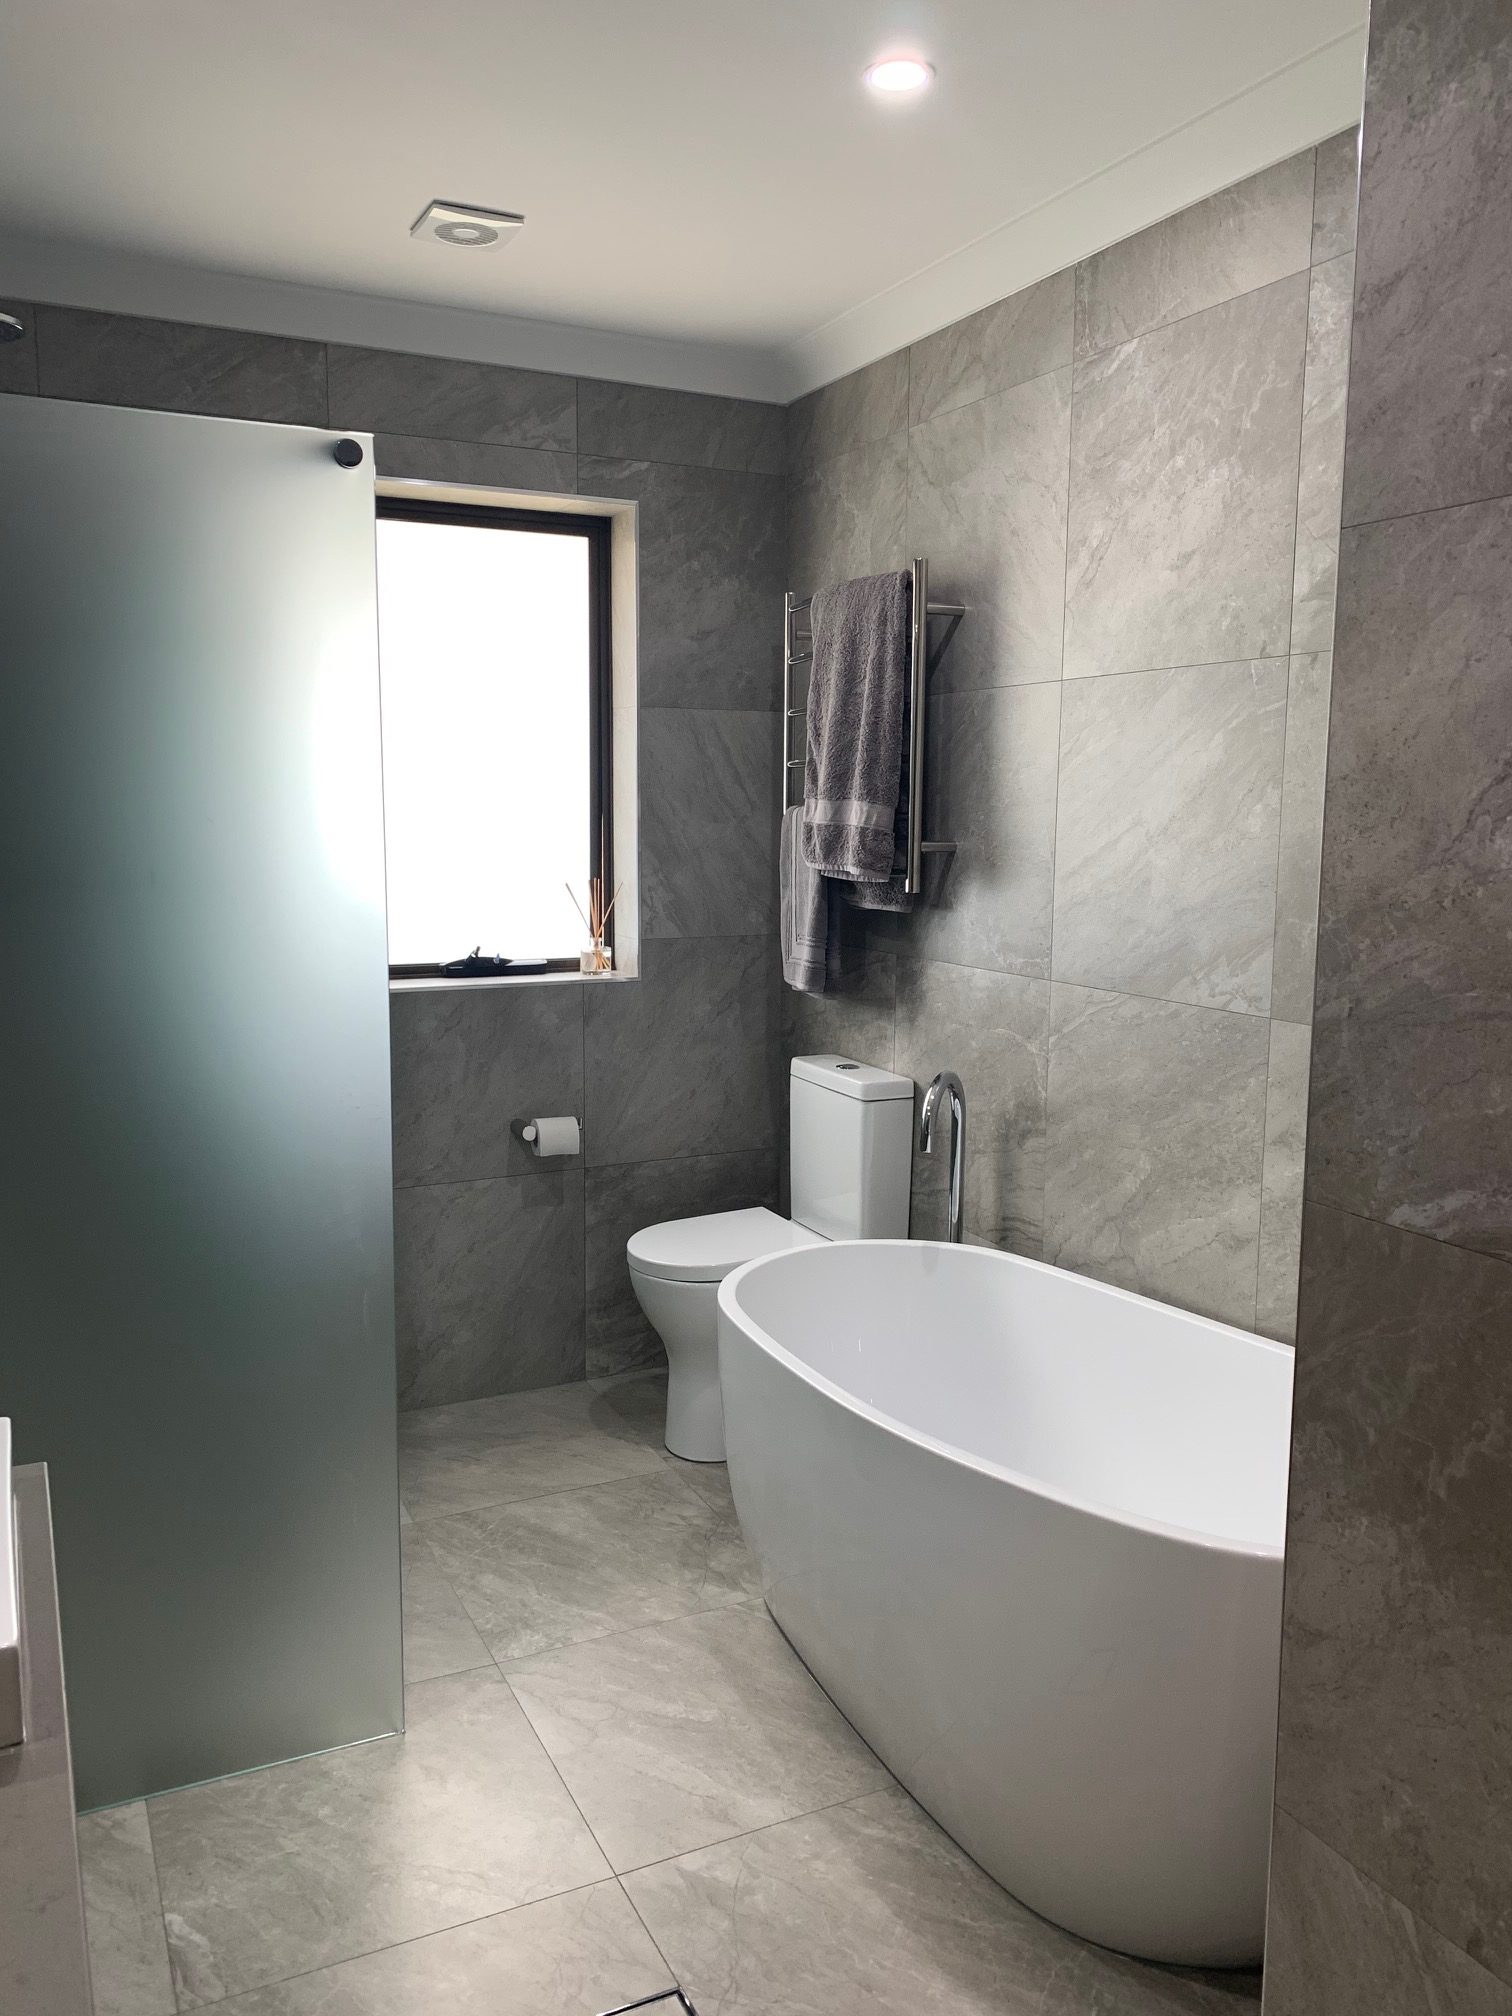 Bathroom completed with warmtech inscreed heating system